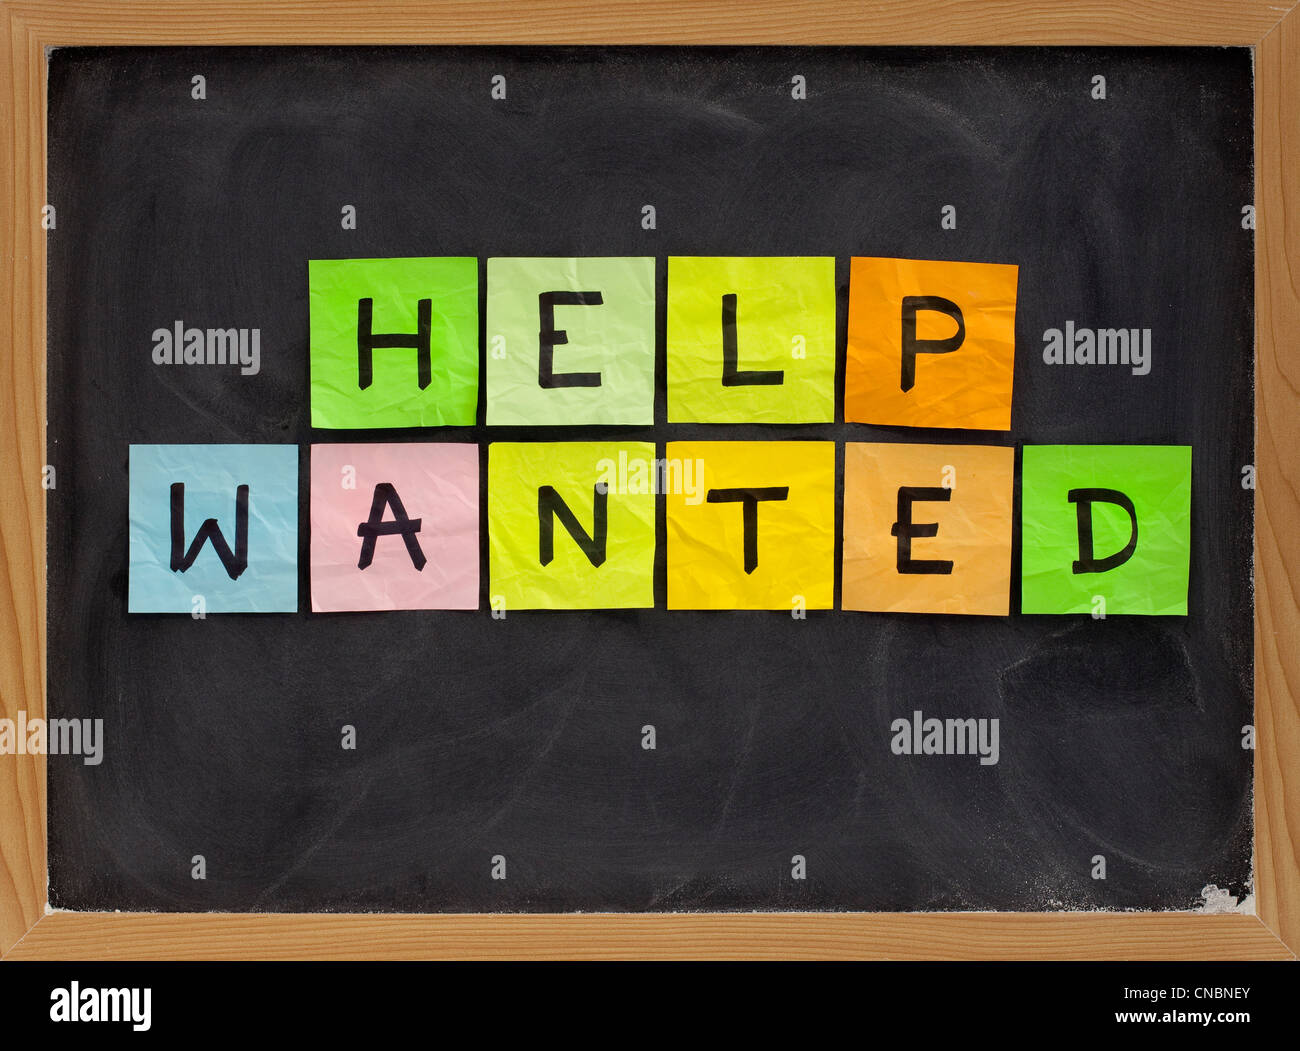 help wanted - colorful sticky notes sign on blackboard with white chalk texture Stock Photo